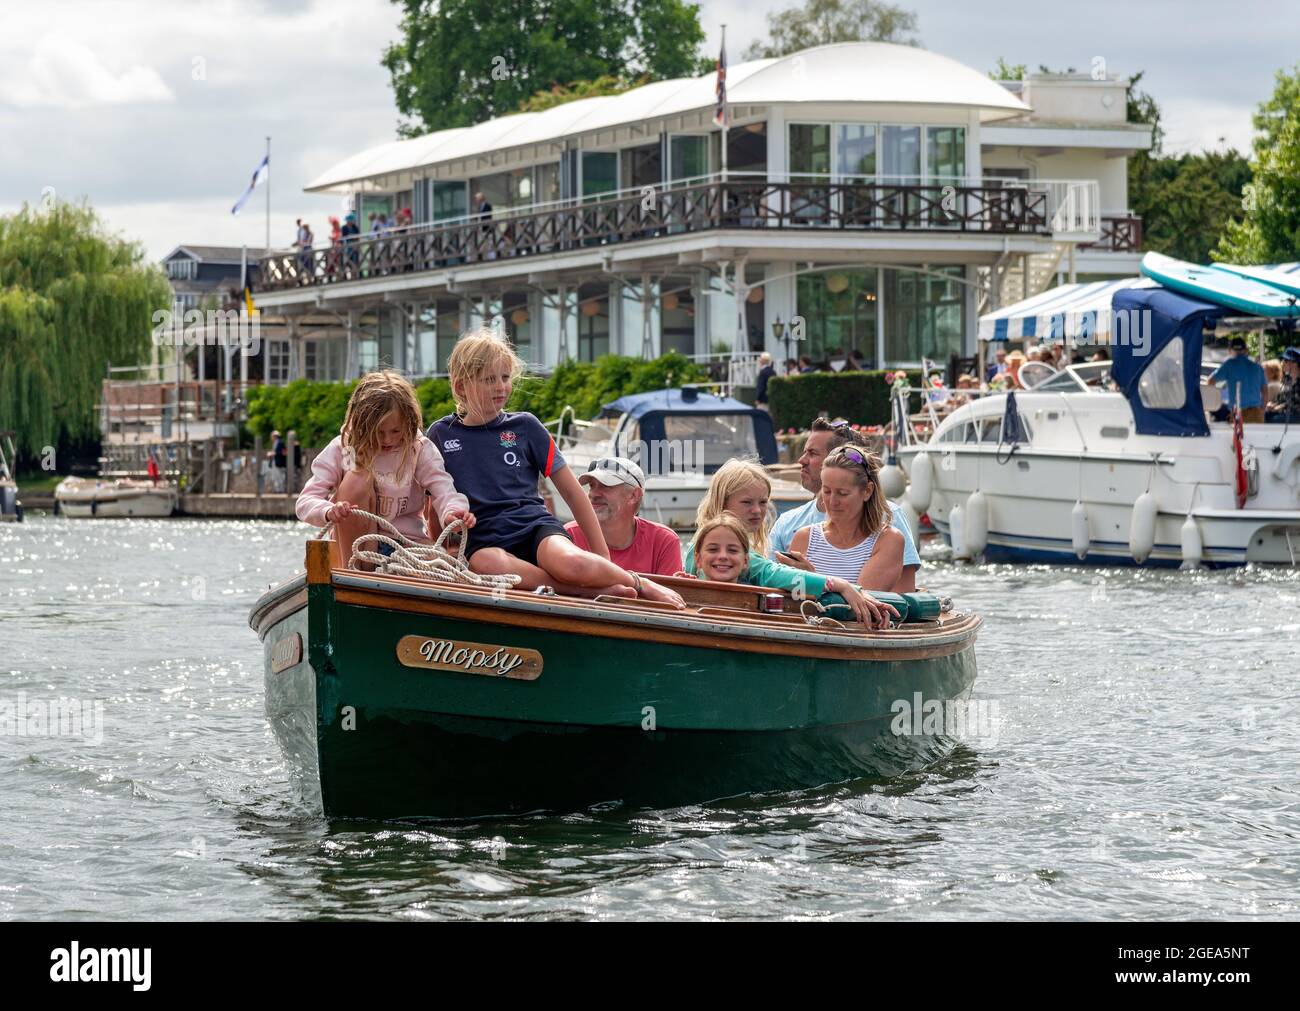 Family with children on the River Thames during Henley Royal Regatta, Henley-on-Thames, Oxfordshire, England, UK Stock Photo